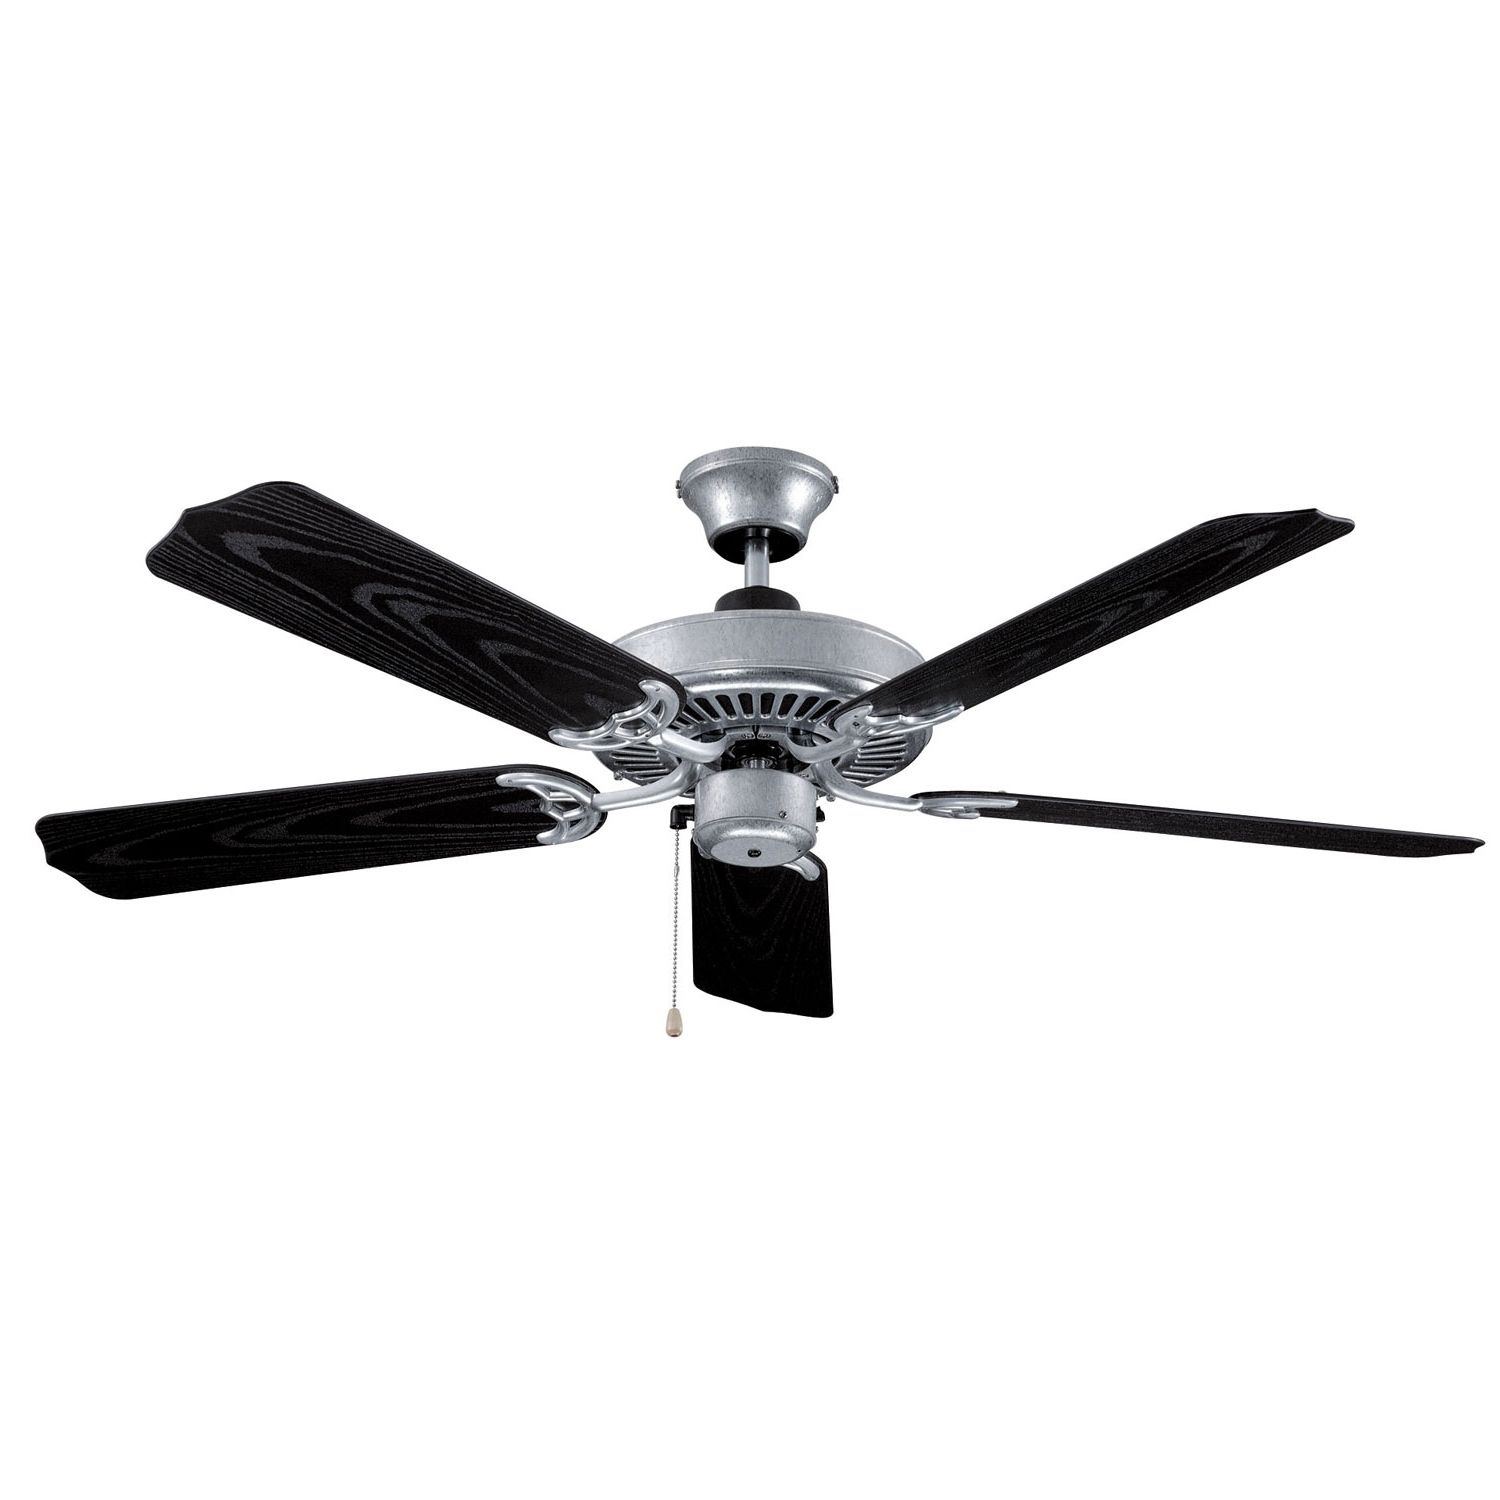 Craftmade Enduro Galvanized 52 Inch Blade Span Outdoor Ceiling Fan With Regard To Most Current Outdoor Ceiling Fans With Galvanized Blades (View 19 of 20)